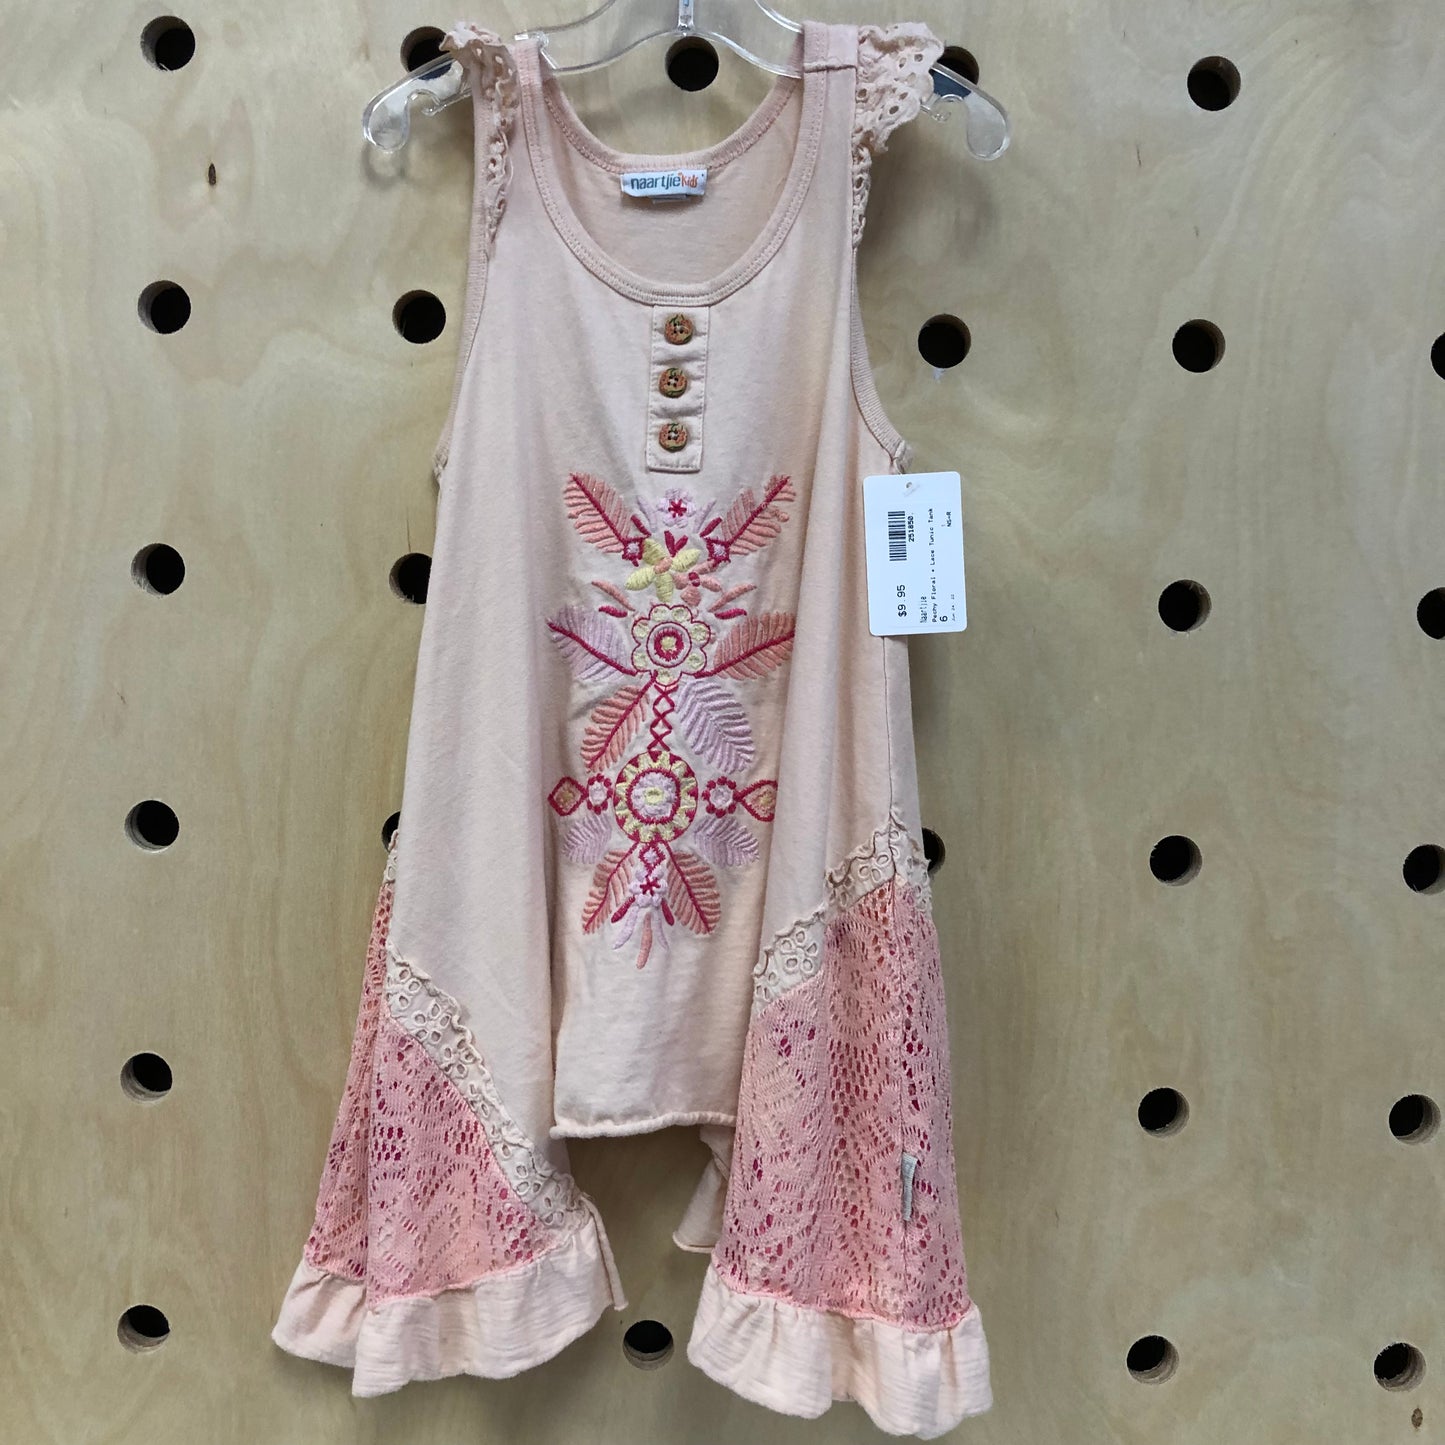 Peachy Floral + Lace Tunic Tank